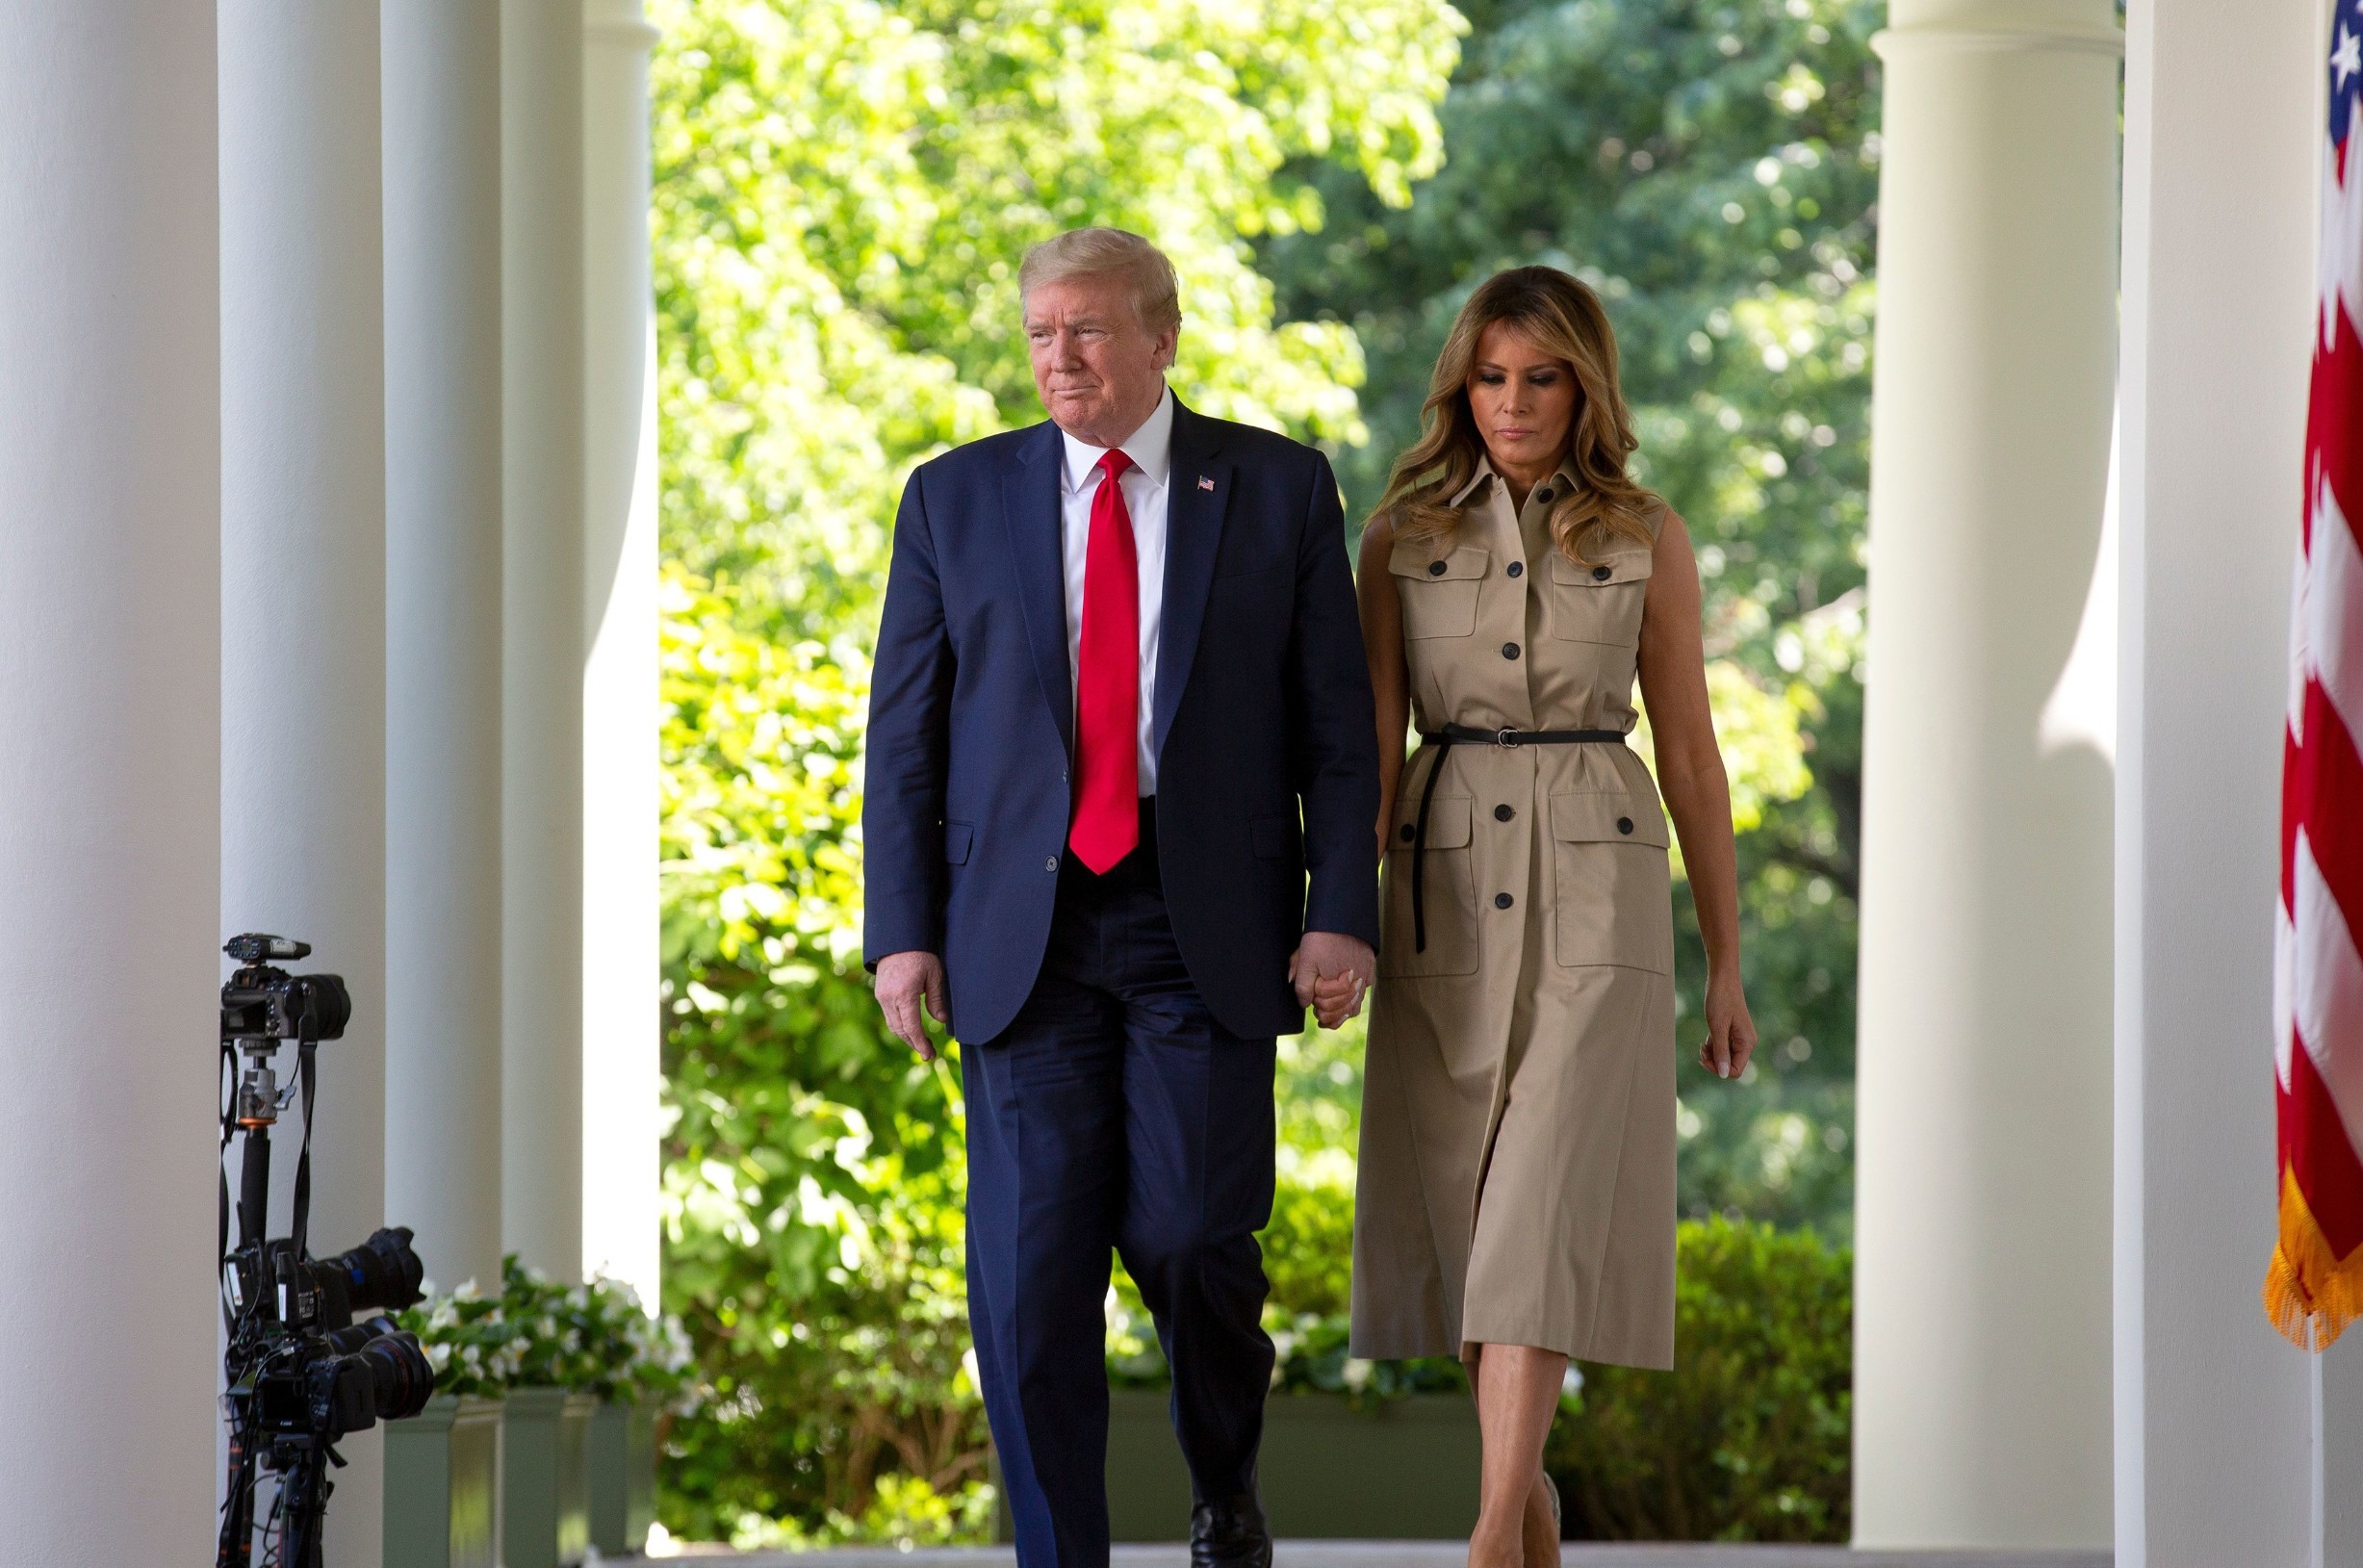 First lady Melania Trump and United States President Donald J. Trump arrive to the National Day of Prayer Service at the White House in Washington D.C., U.S.,.
National Day of Prayer Service, Washington, District of Columbia, USA - 07 May 2020, Image: 517850589, License: Rights-managed, Restrictions: , Model Release: no, Credit line: REX / Shutterstock Editorial / Profimedia